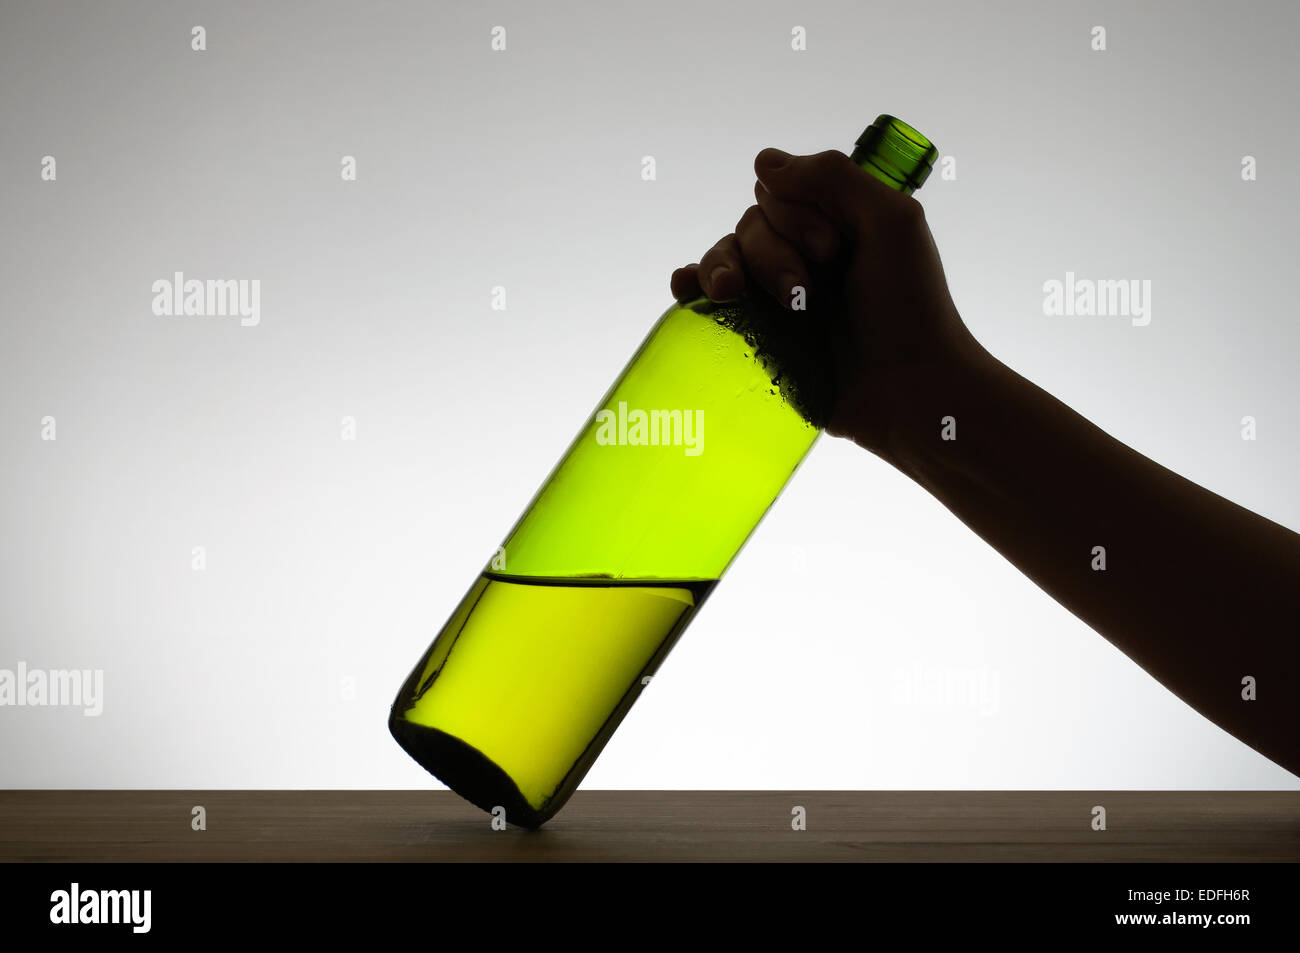 Silhouette of a hand grabbing a green wine bottle Stock Photo